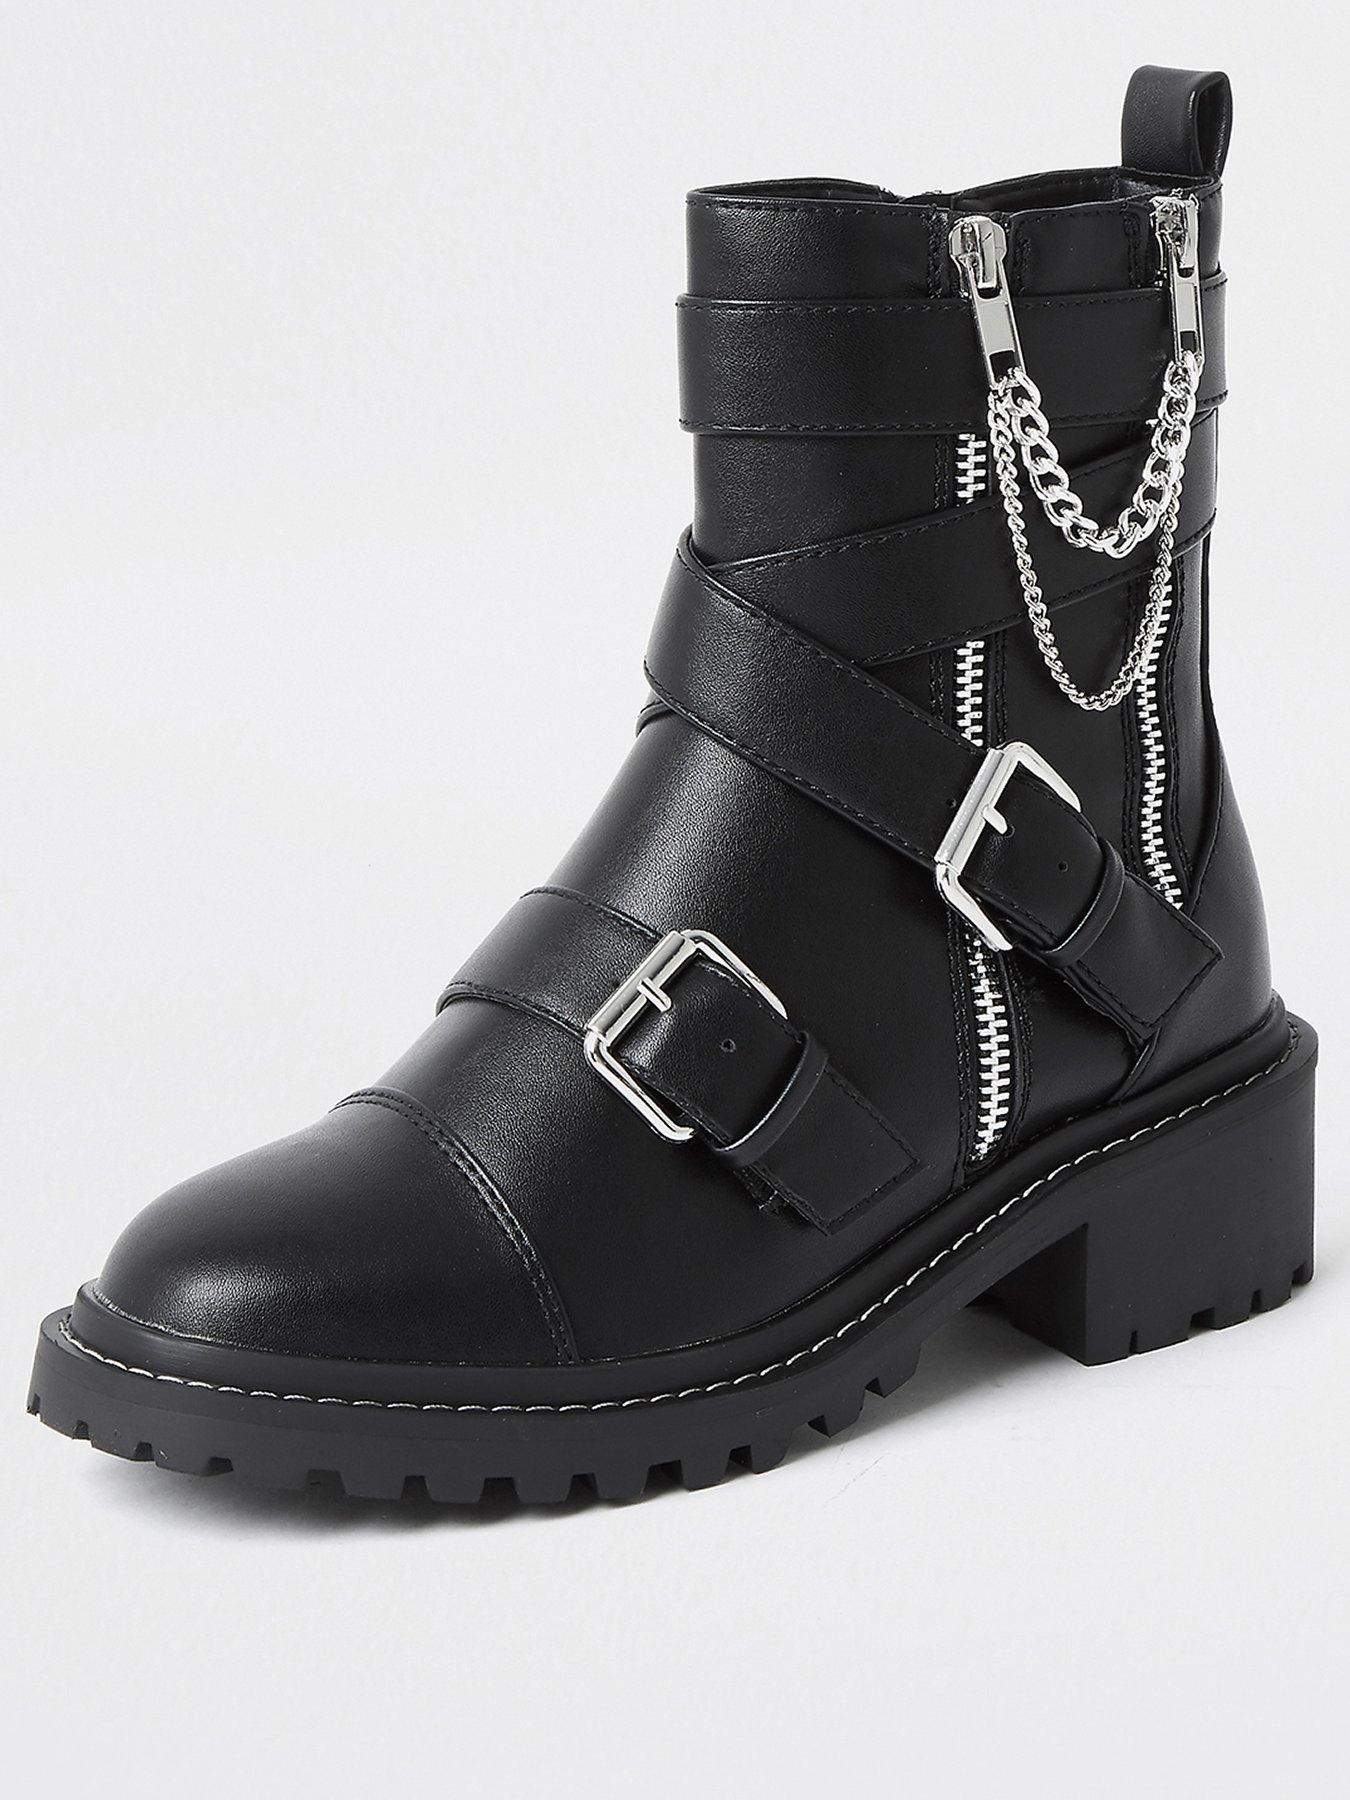 very river island boots